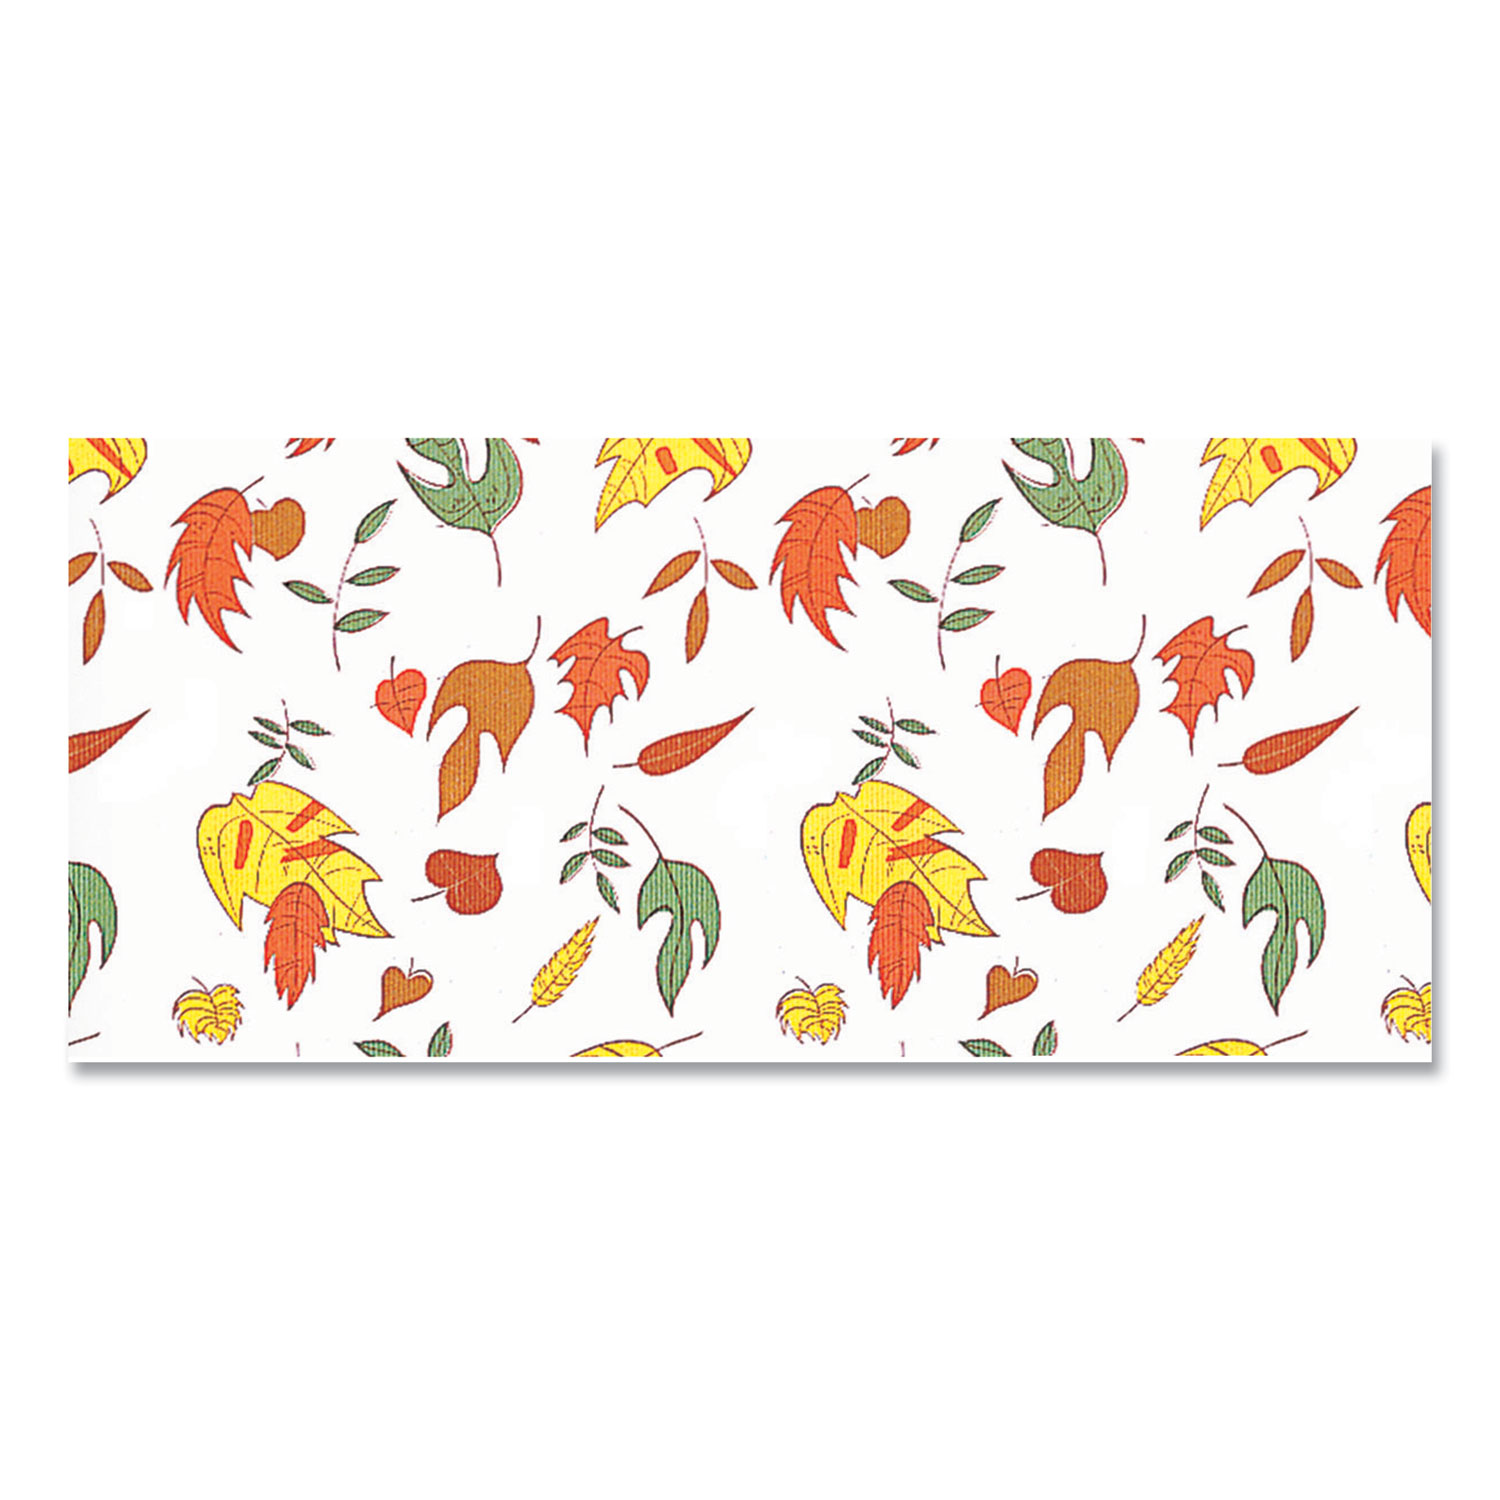  Pacon 0014001 Corobuff Corrugated Paper Roll, 48 x 25 ft, Falling Leaves (PAC24392408) 